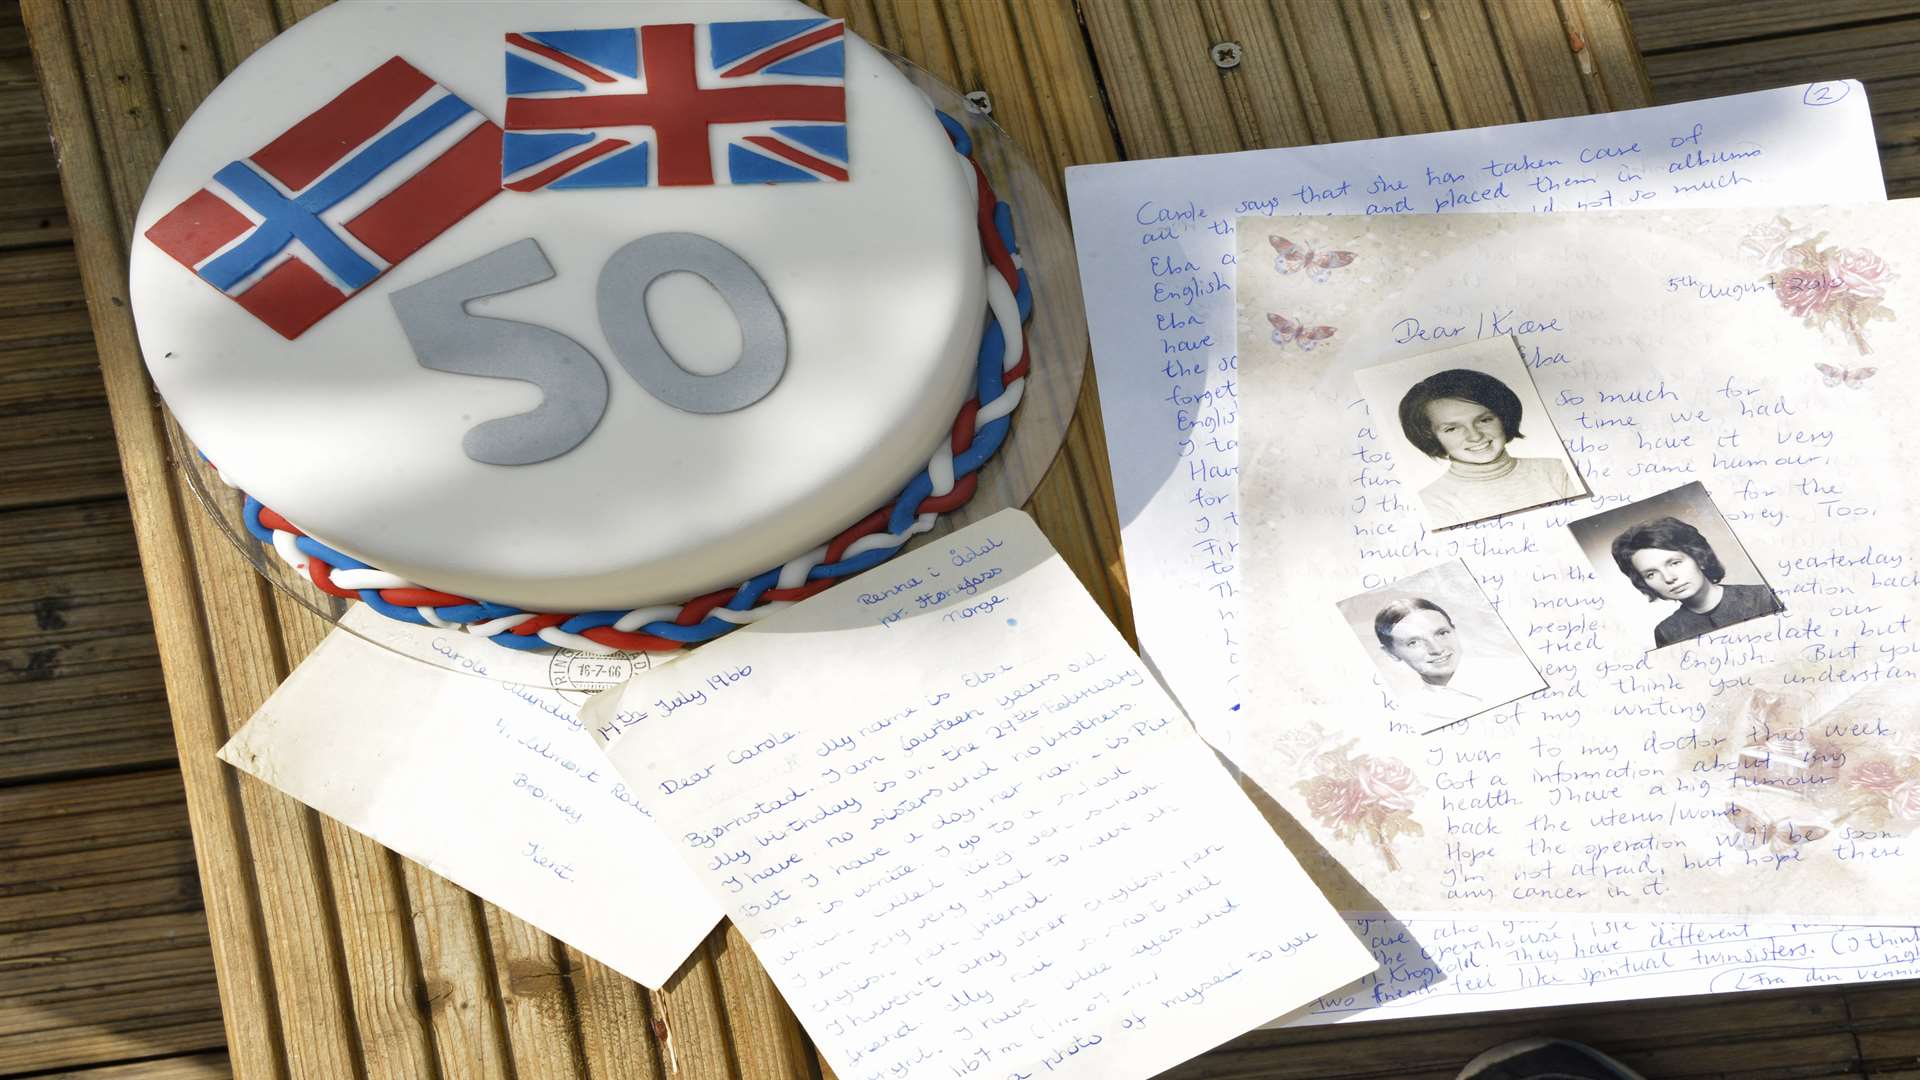 The cake marking 50 years of correspondence. Picture: Ruth Cuerden